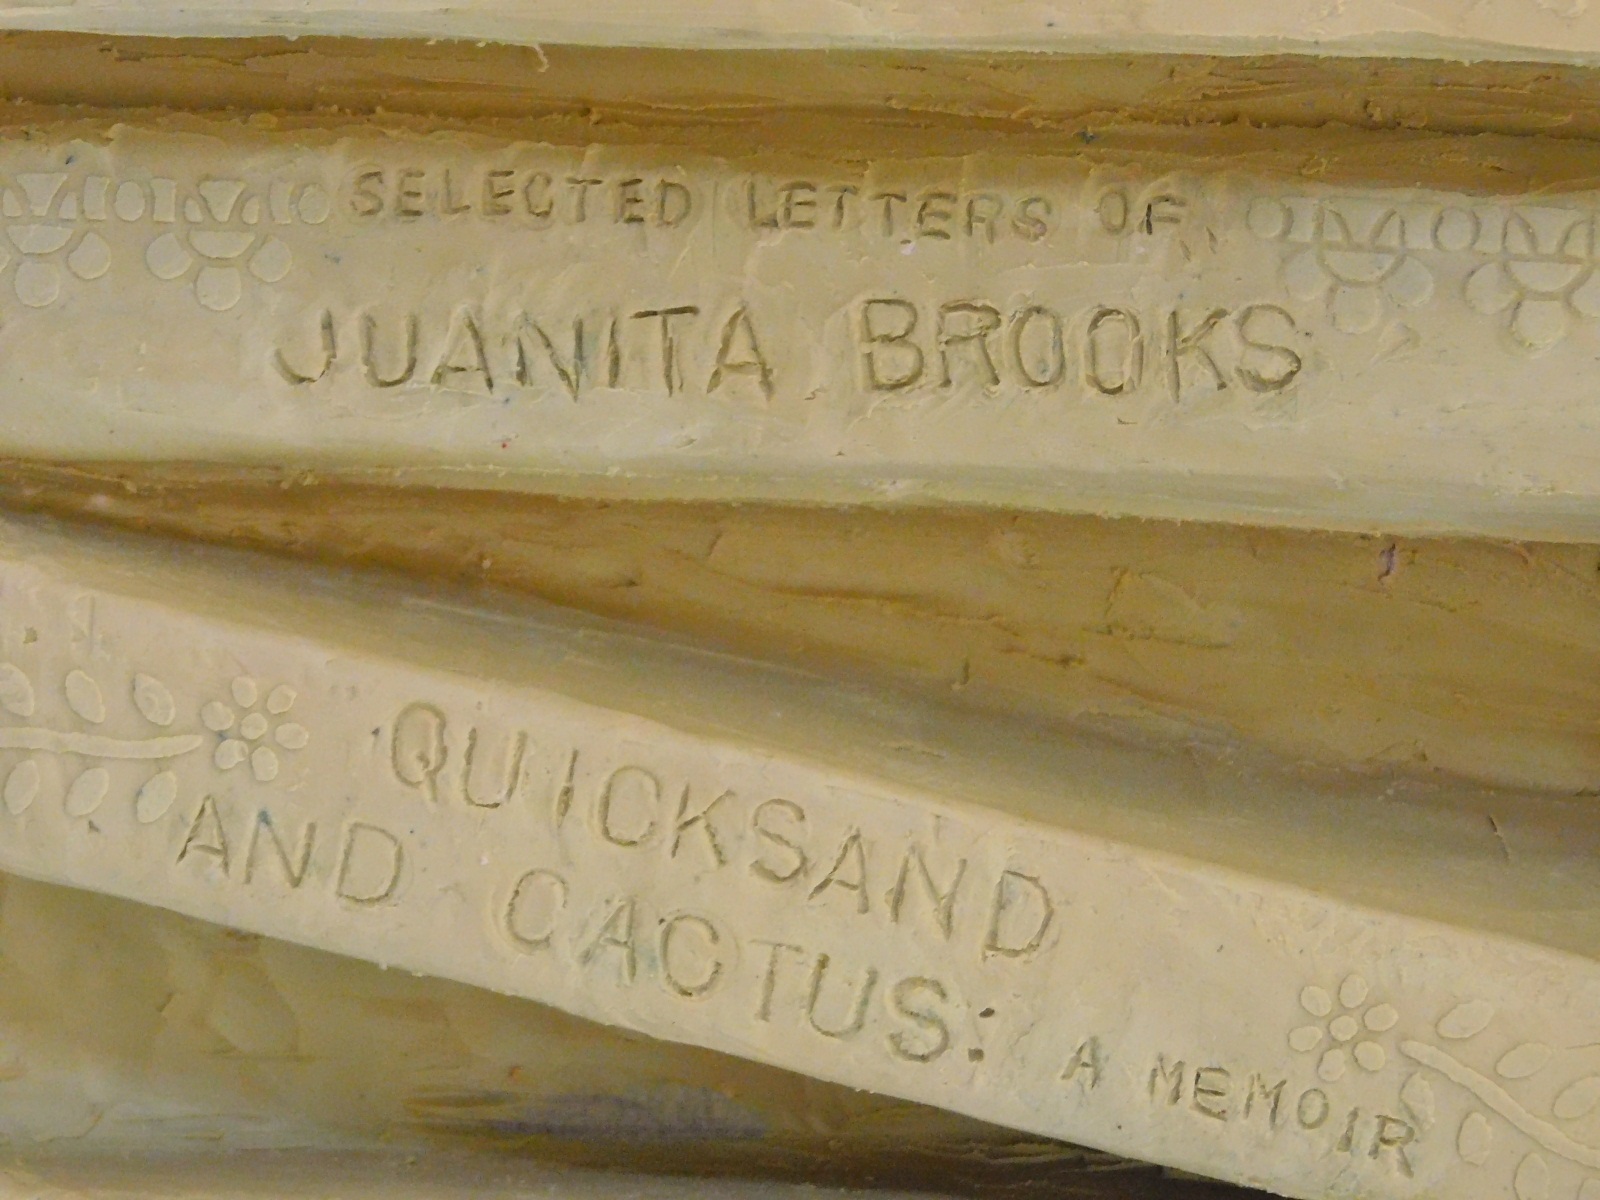 Two of the books in the book stand in the clay model of the Juanita Brooks statue